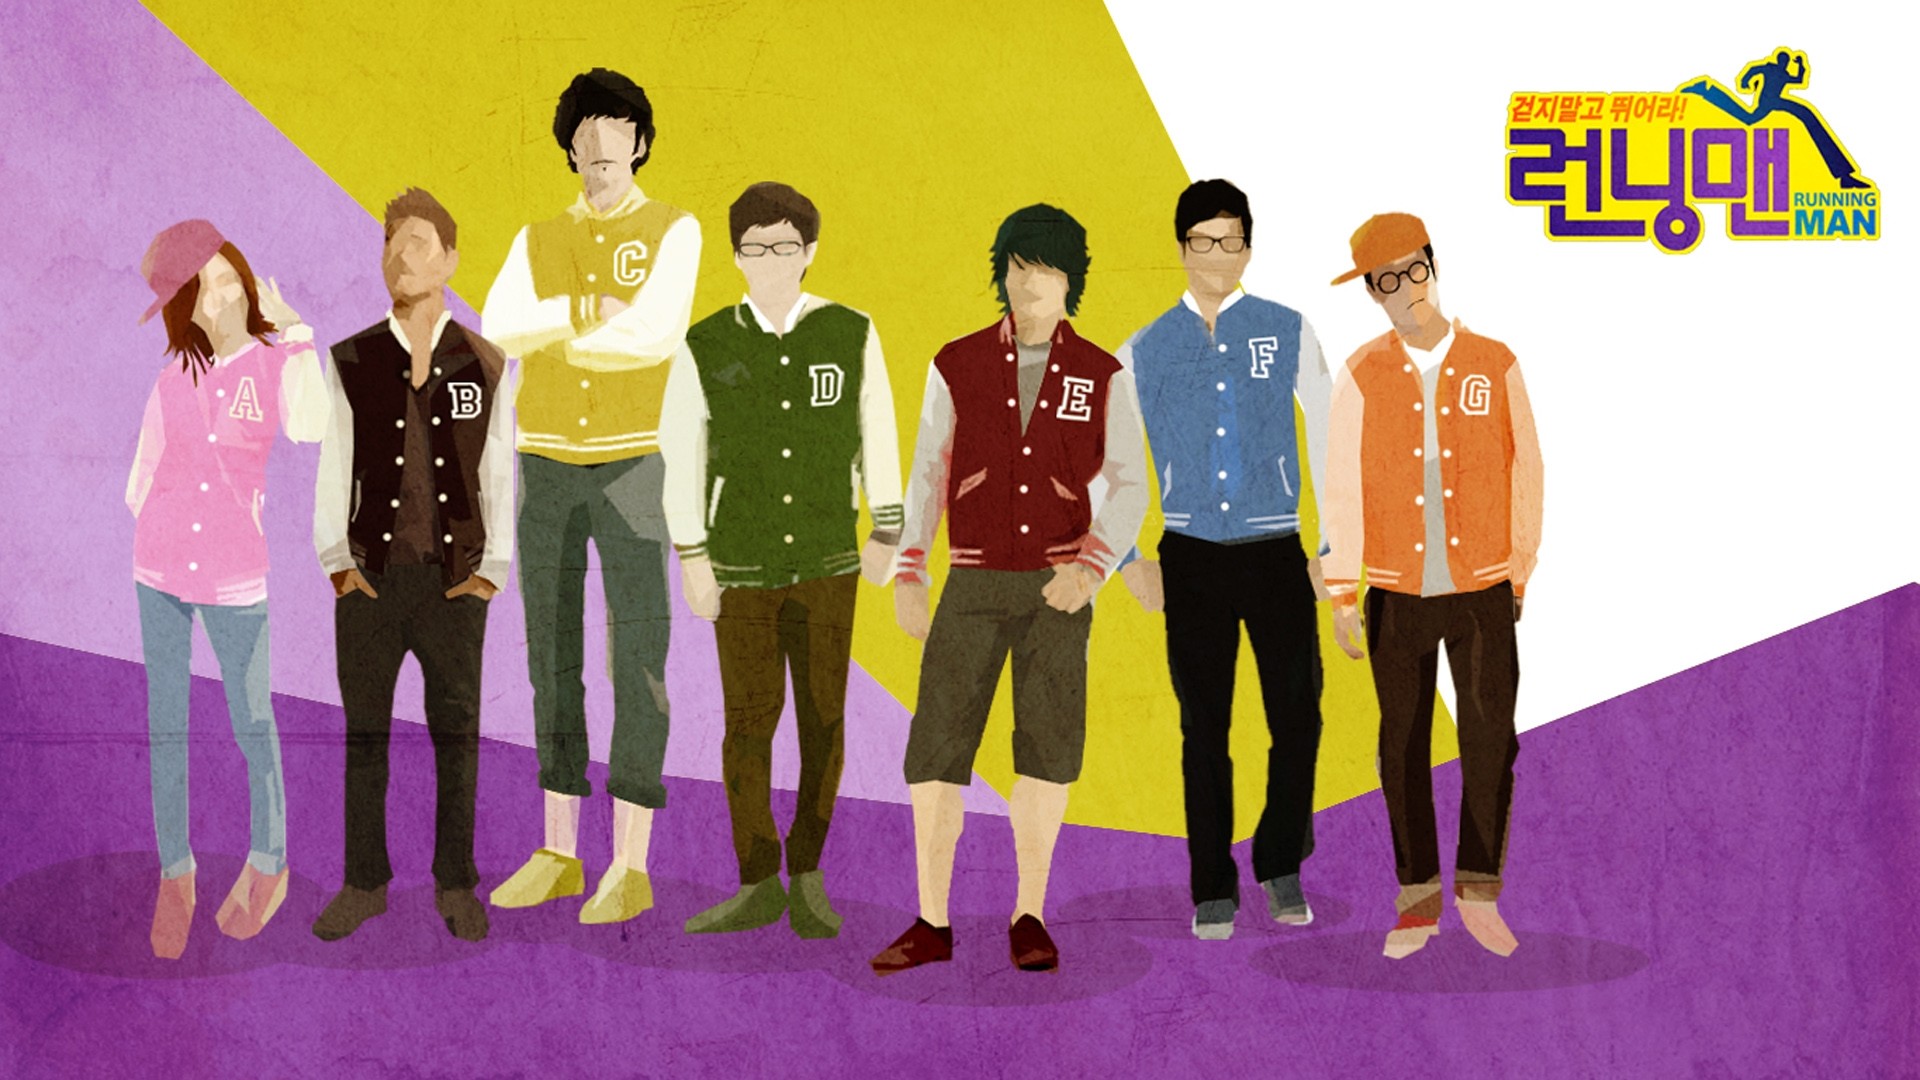 1920x1080 Running Man Source: Keys: running man, television, wallpaper, wallpapers.  Submitted Anonymously 5 years ago